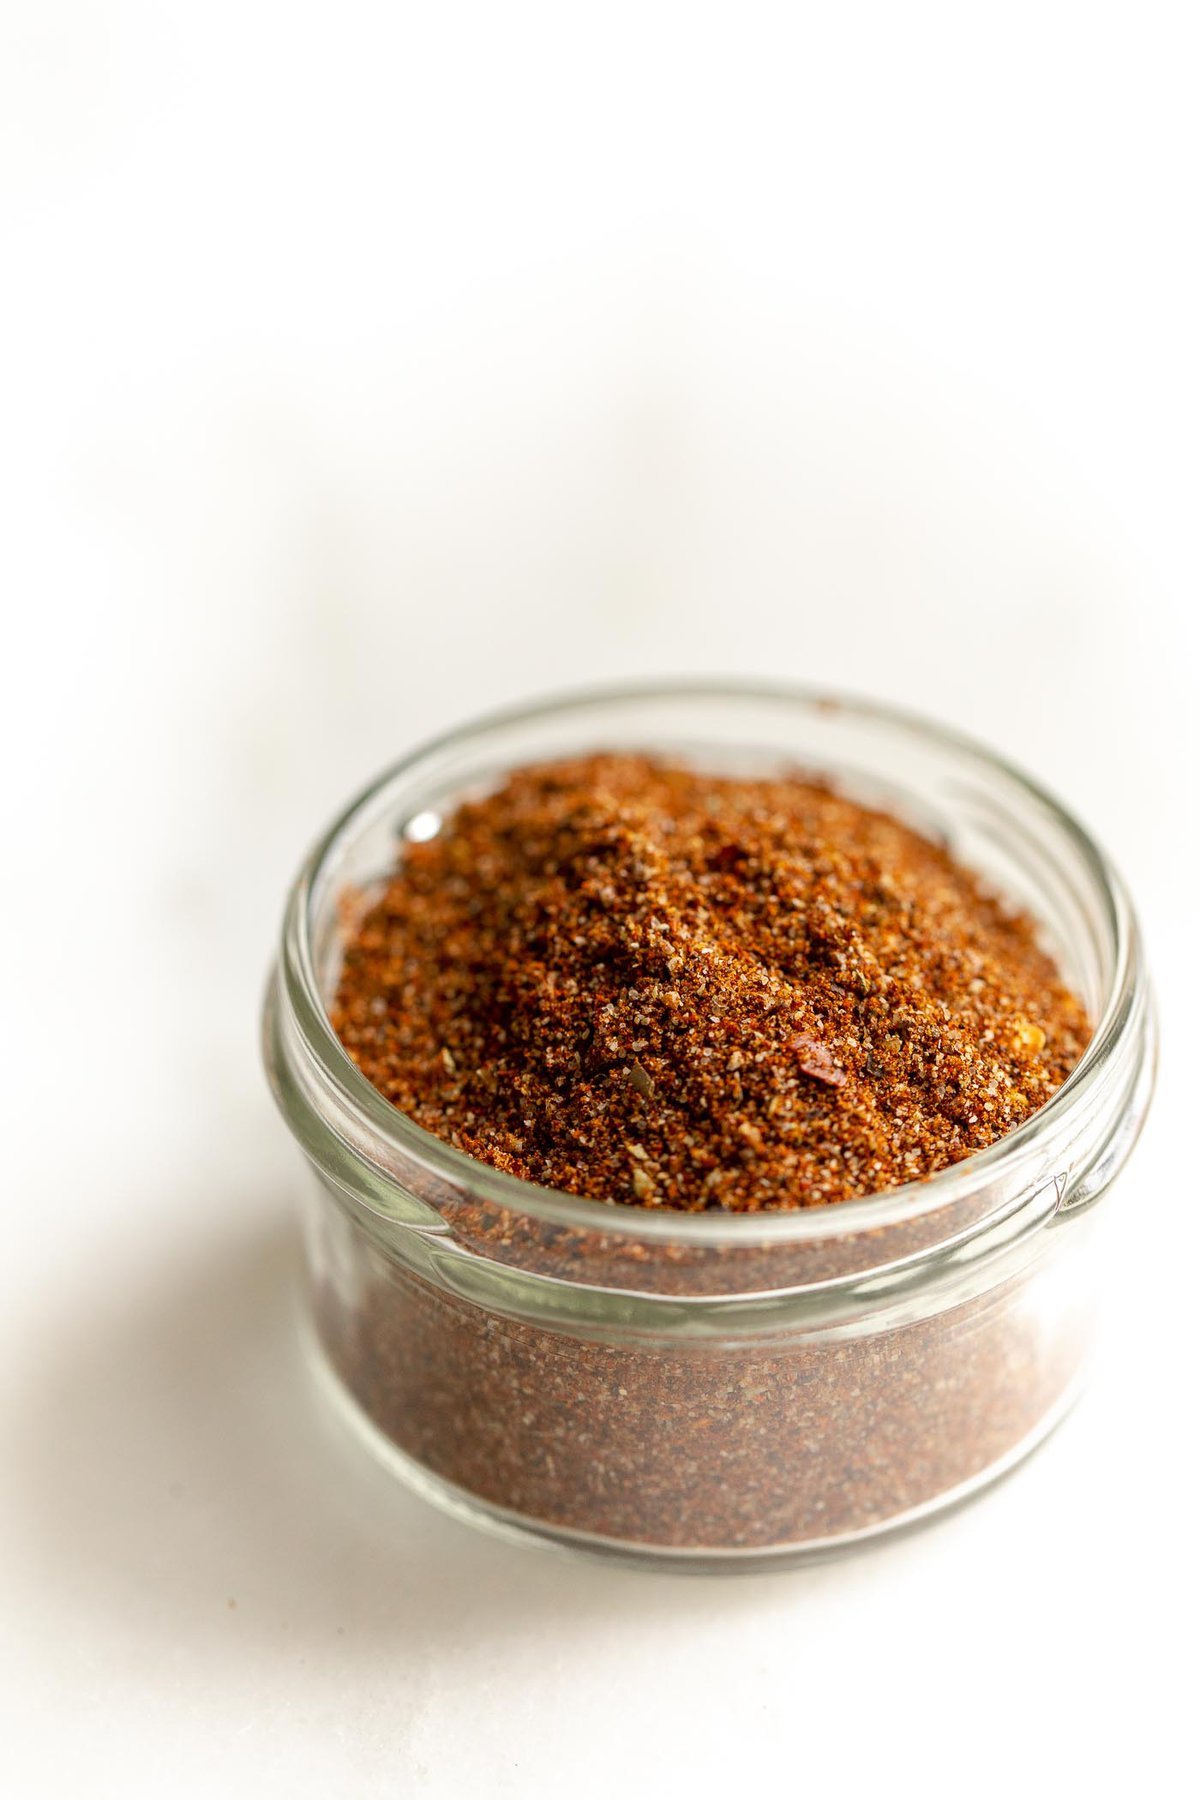 A small glass jar full of taco seasoning on a marble countertop.